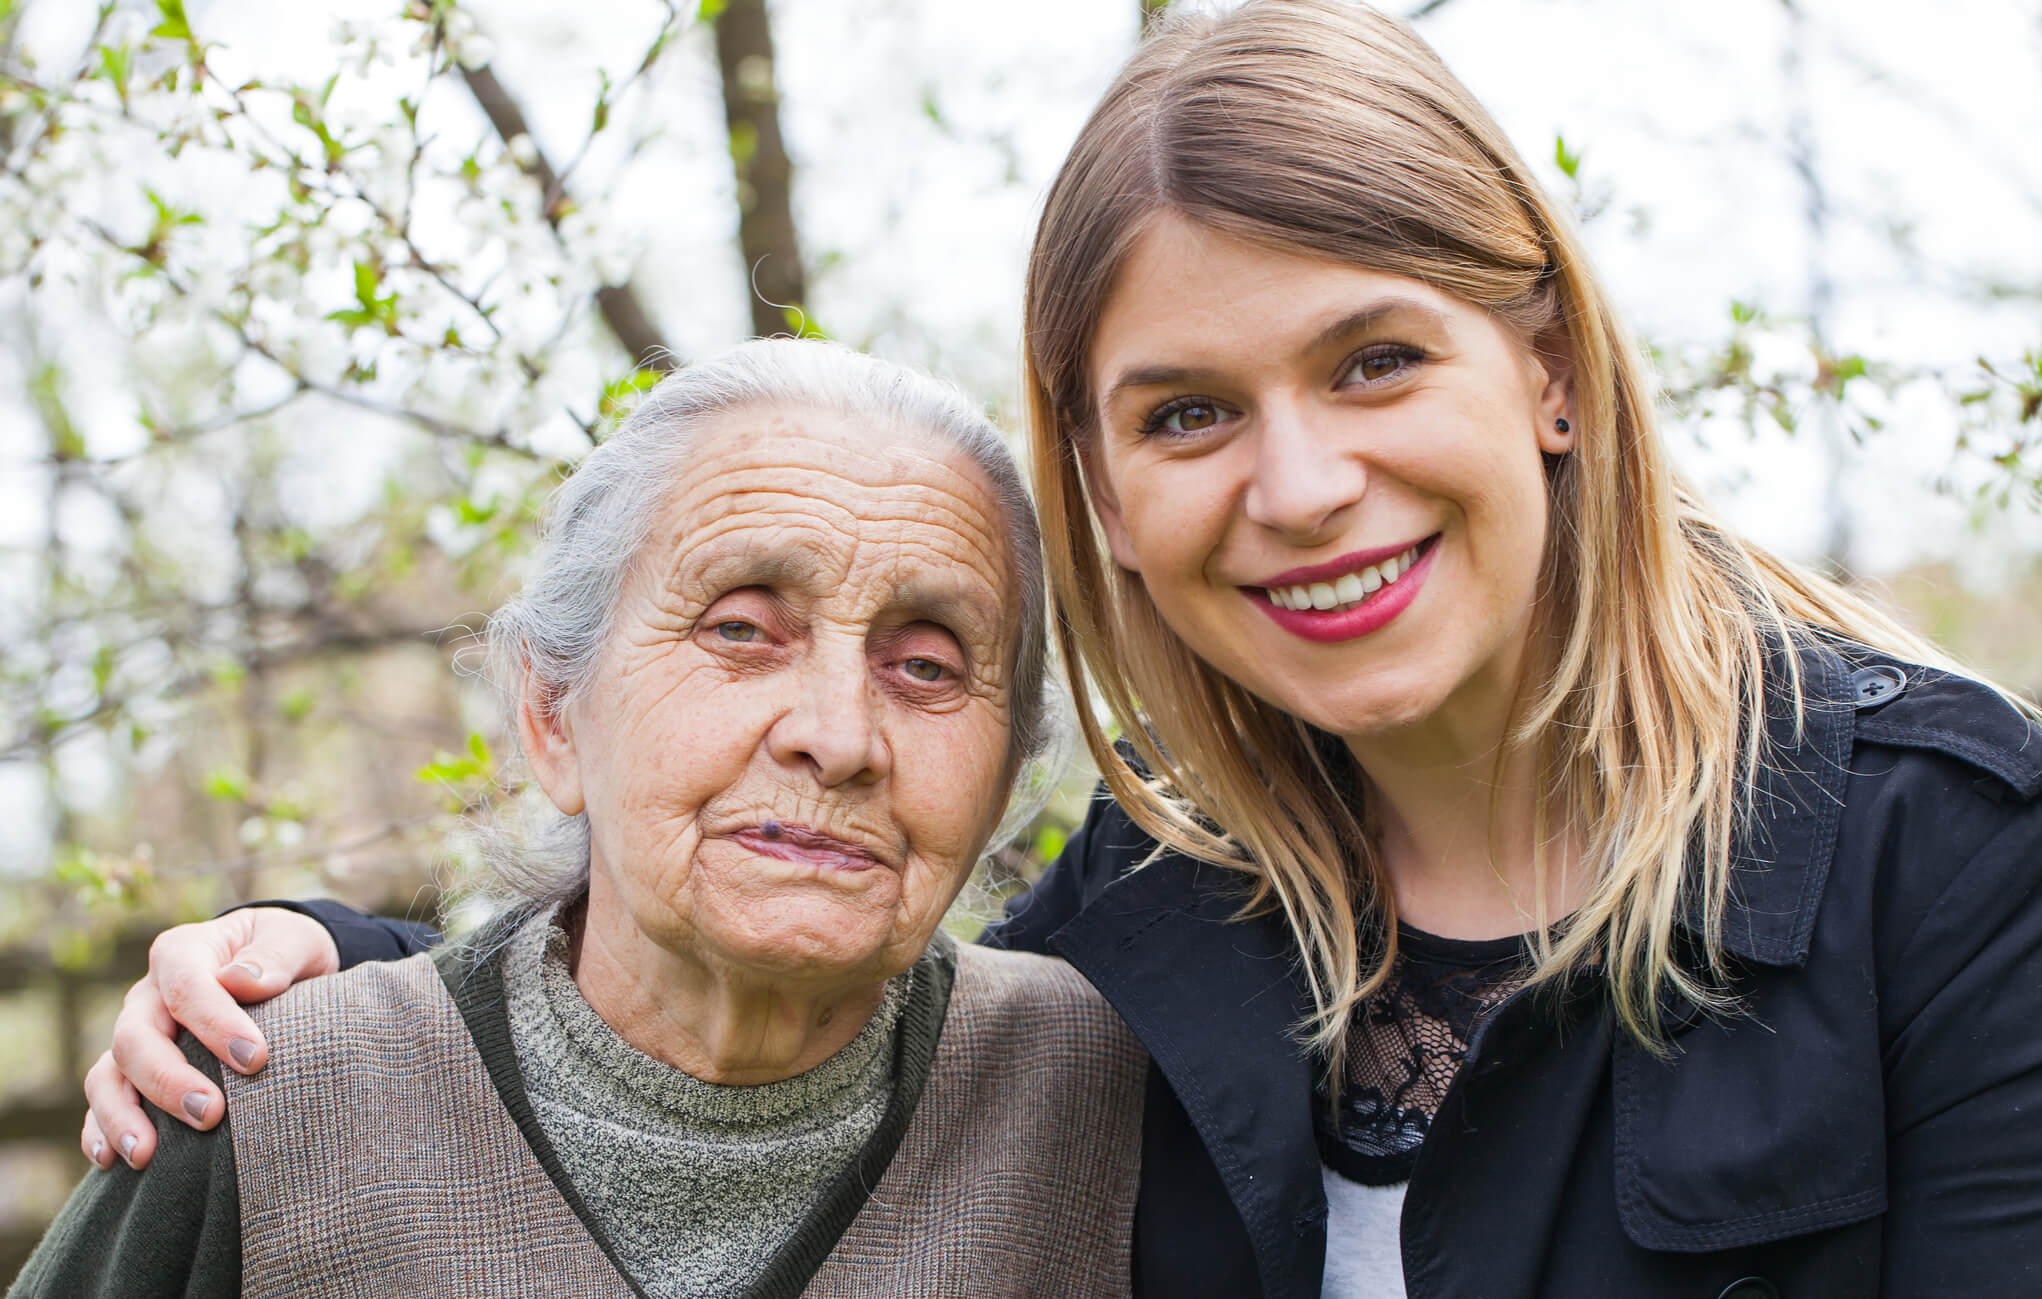 A caregiver pictured with an older adult